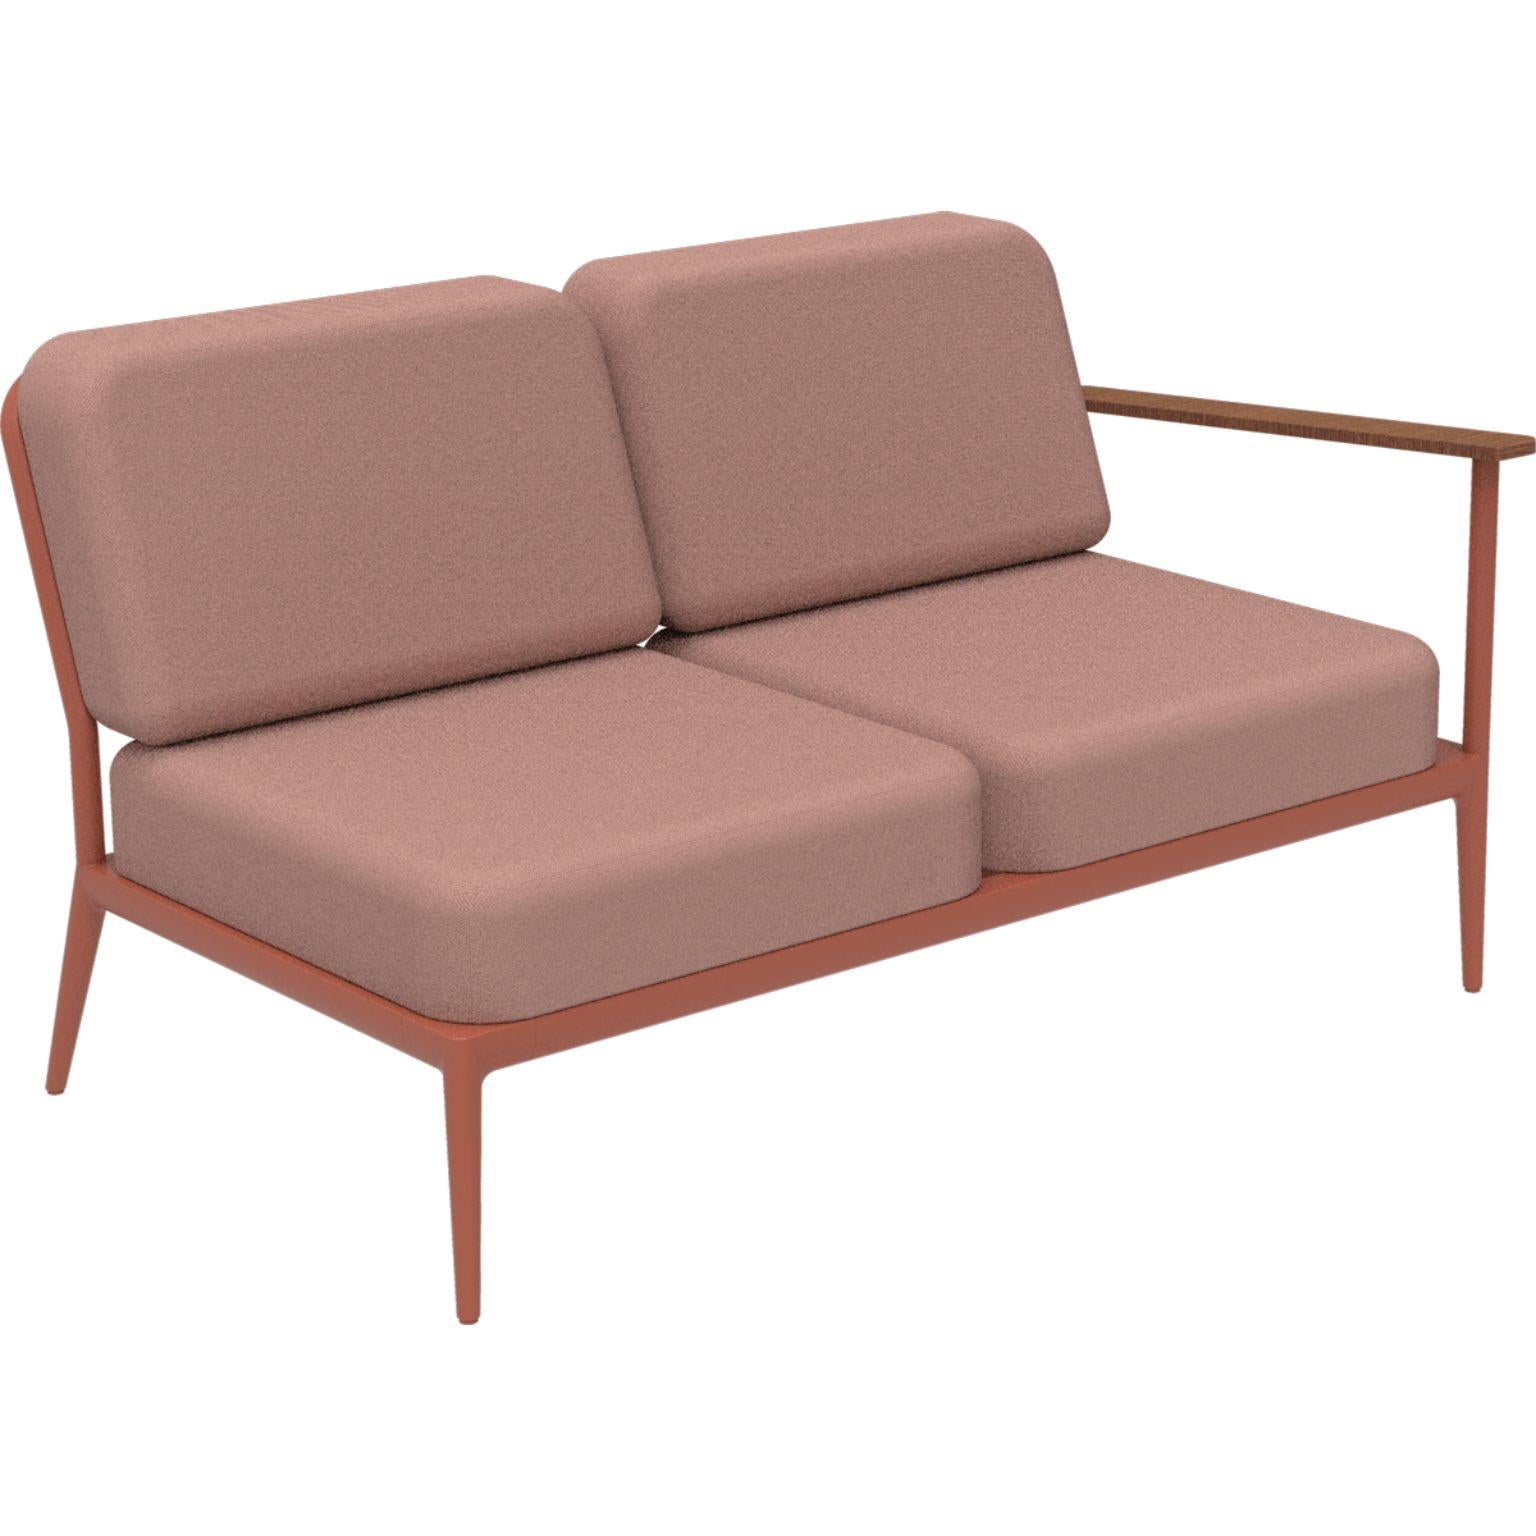 Nature Salmon Double Left modular sofa by MOWEE
Dimensions: D85 x W144 x H81 cm (seat height 42 cm).
Material: Aluminum, upholstery and Iroko Wood.
Weight: 29 kg.
Also available in different colors and finishes. 

An unmistakable collection